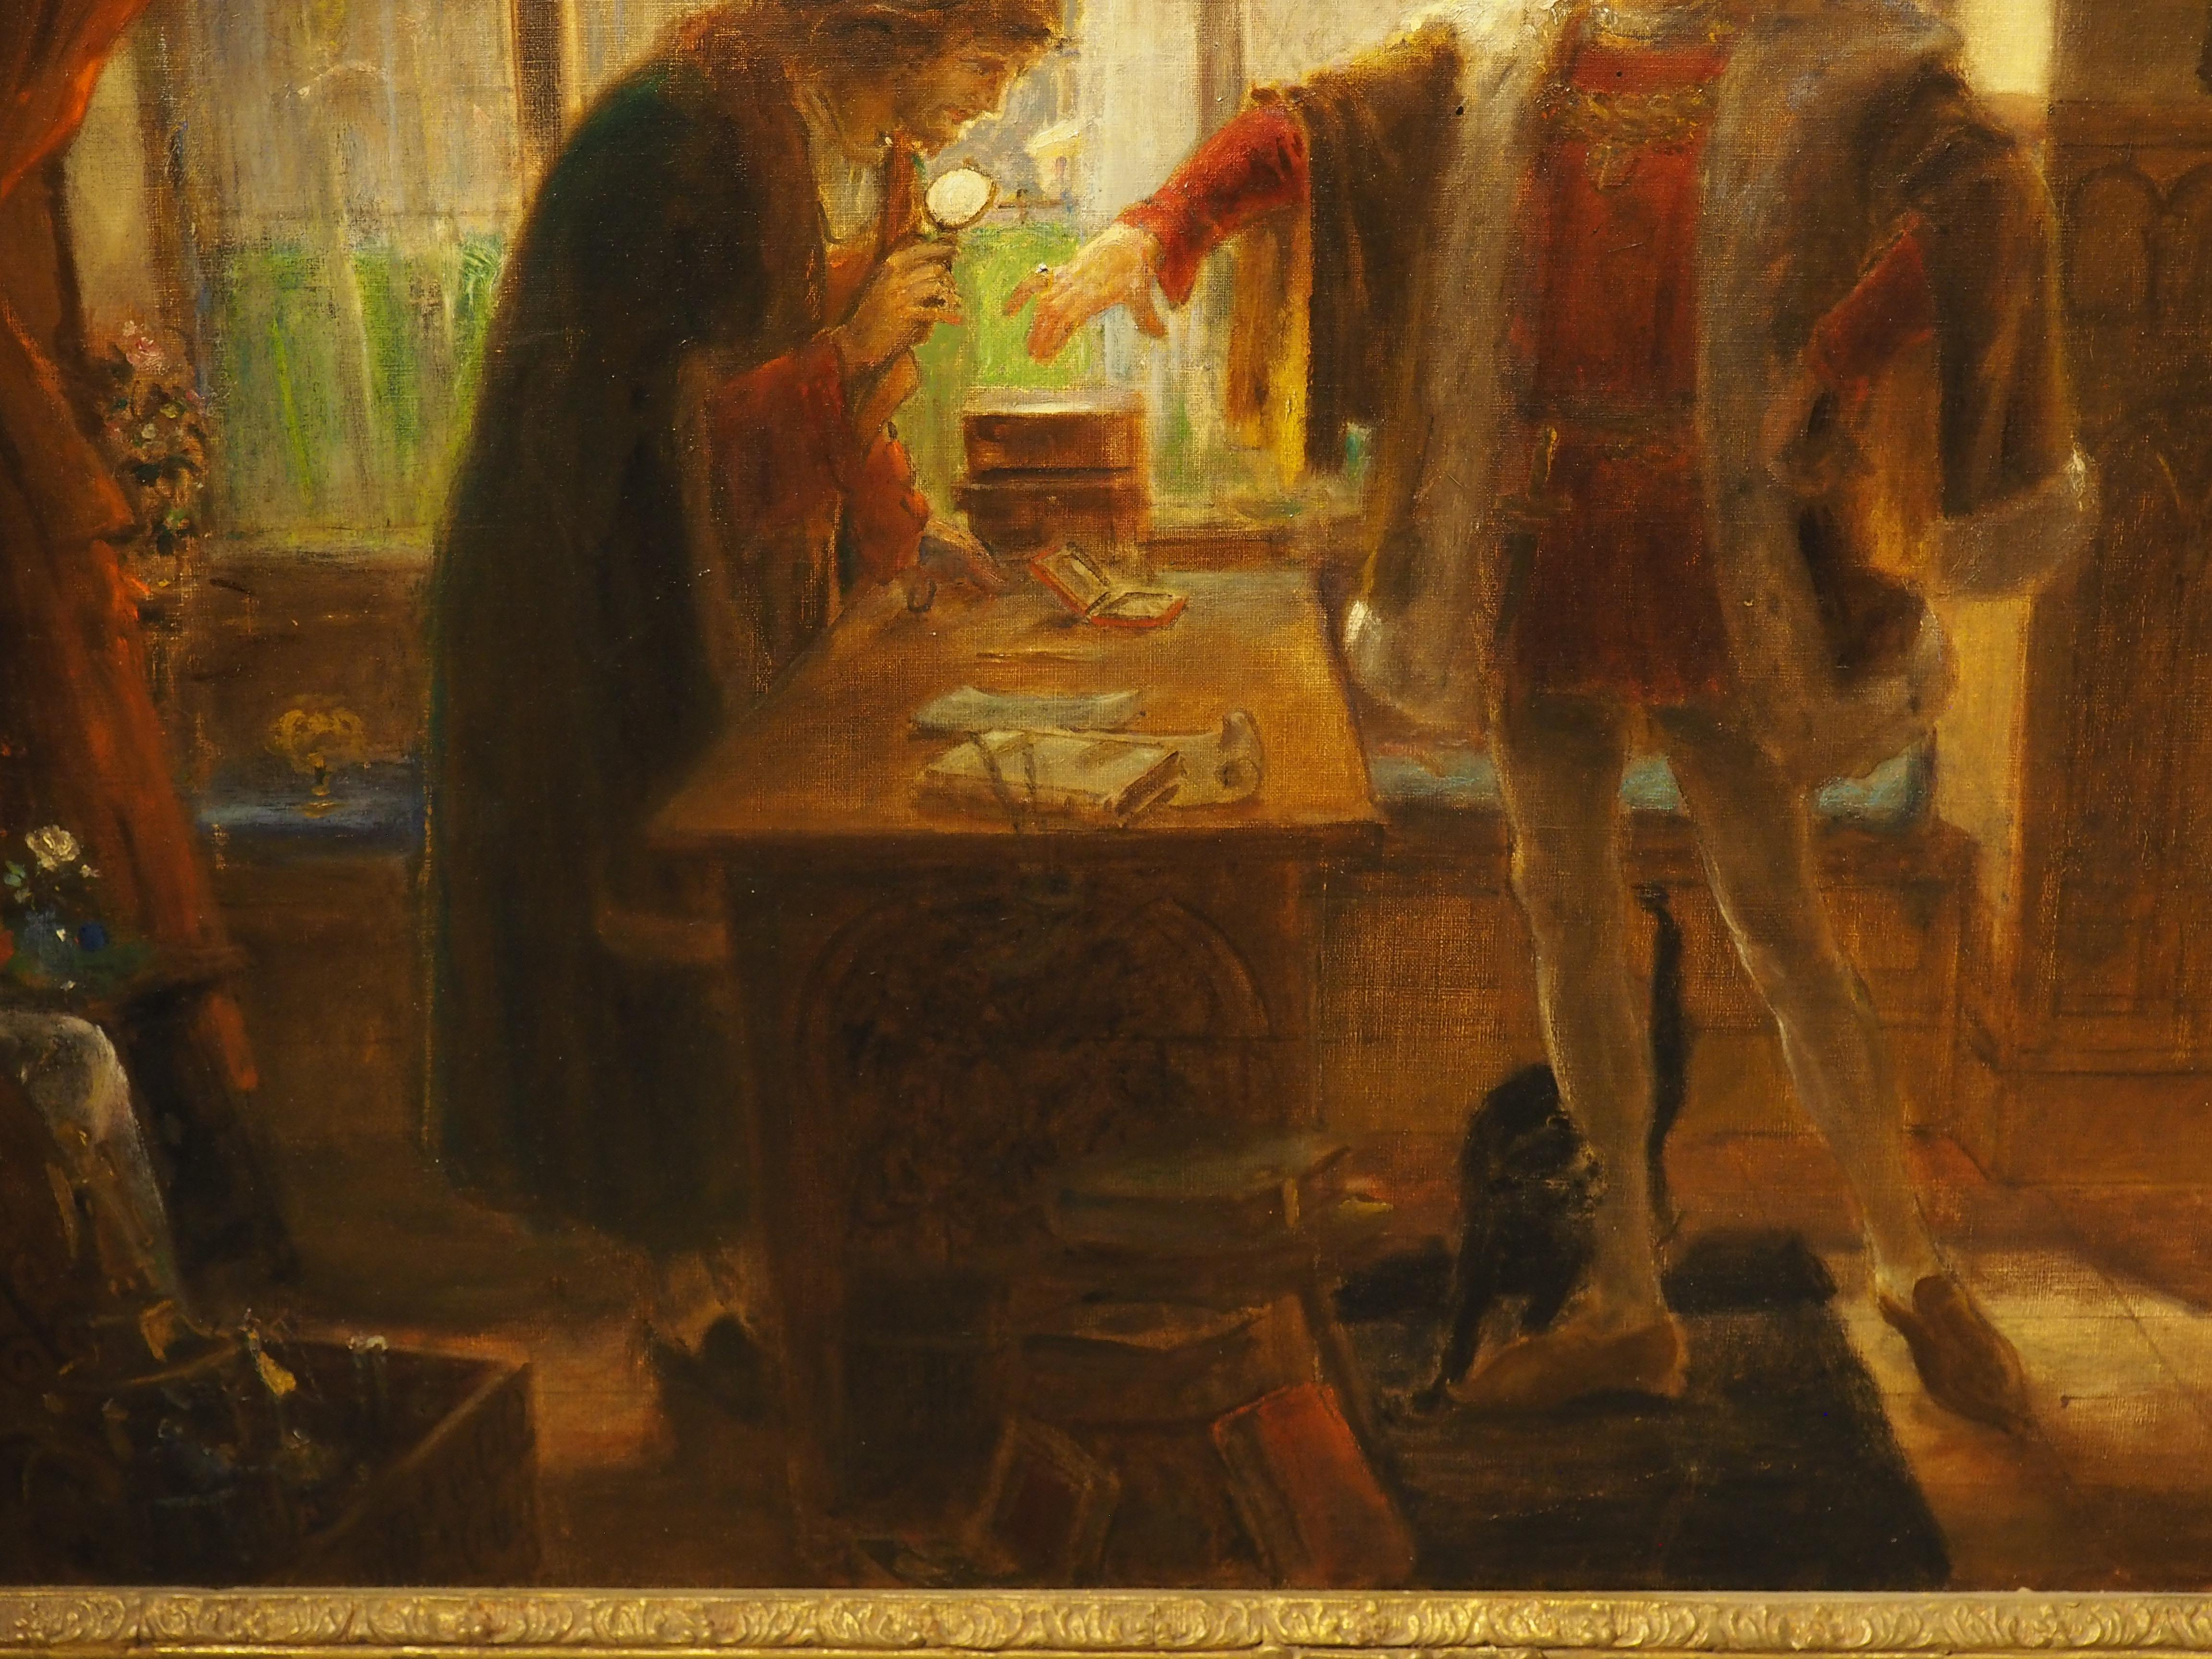 This antique oil painting on canvas is estimated to be from the mid or late 1800’s and has been signed in the lower right corner by the artist (possibly “P.H. Newman”). The painting is an interior scene depicting a nobleman presenting his ring for